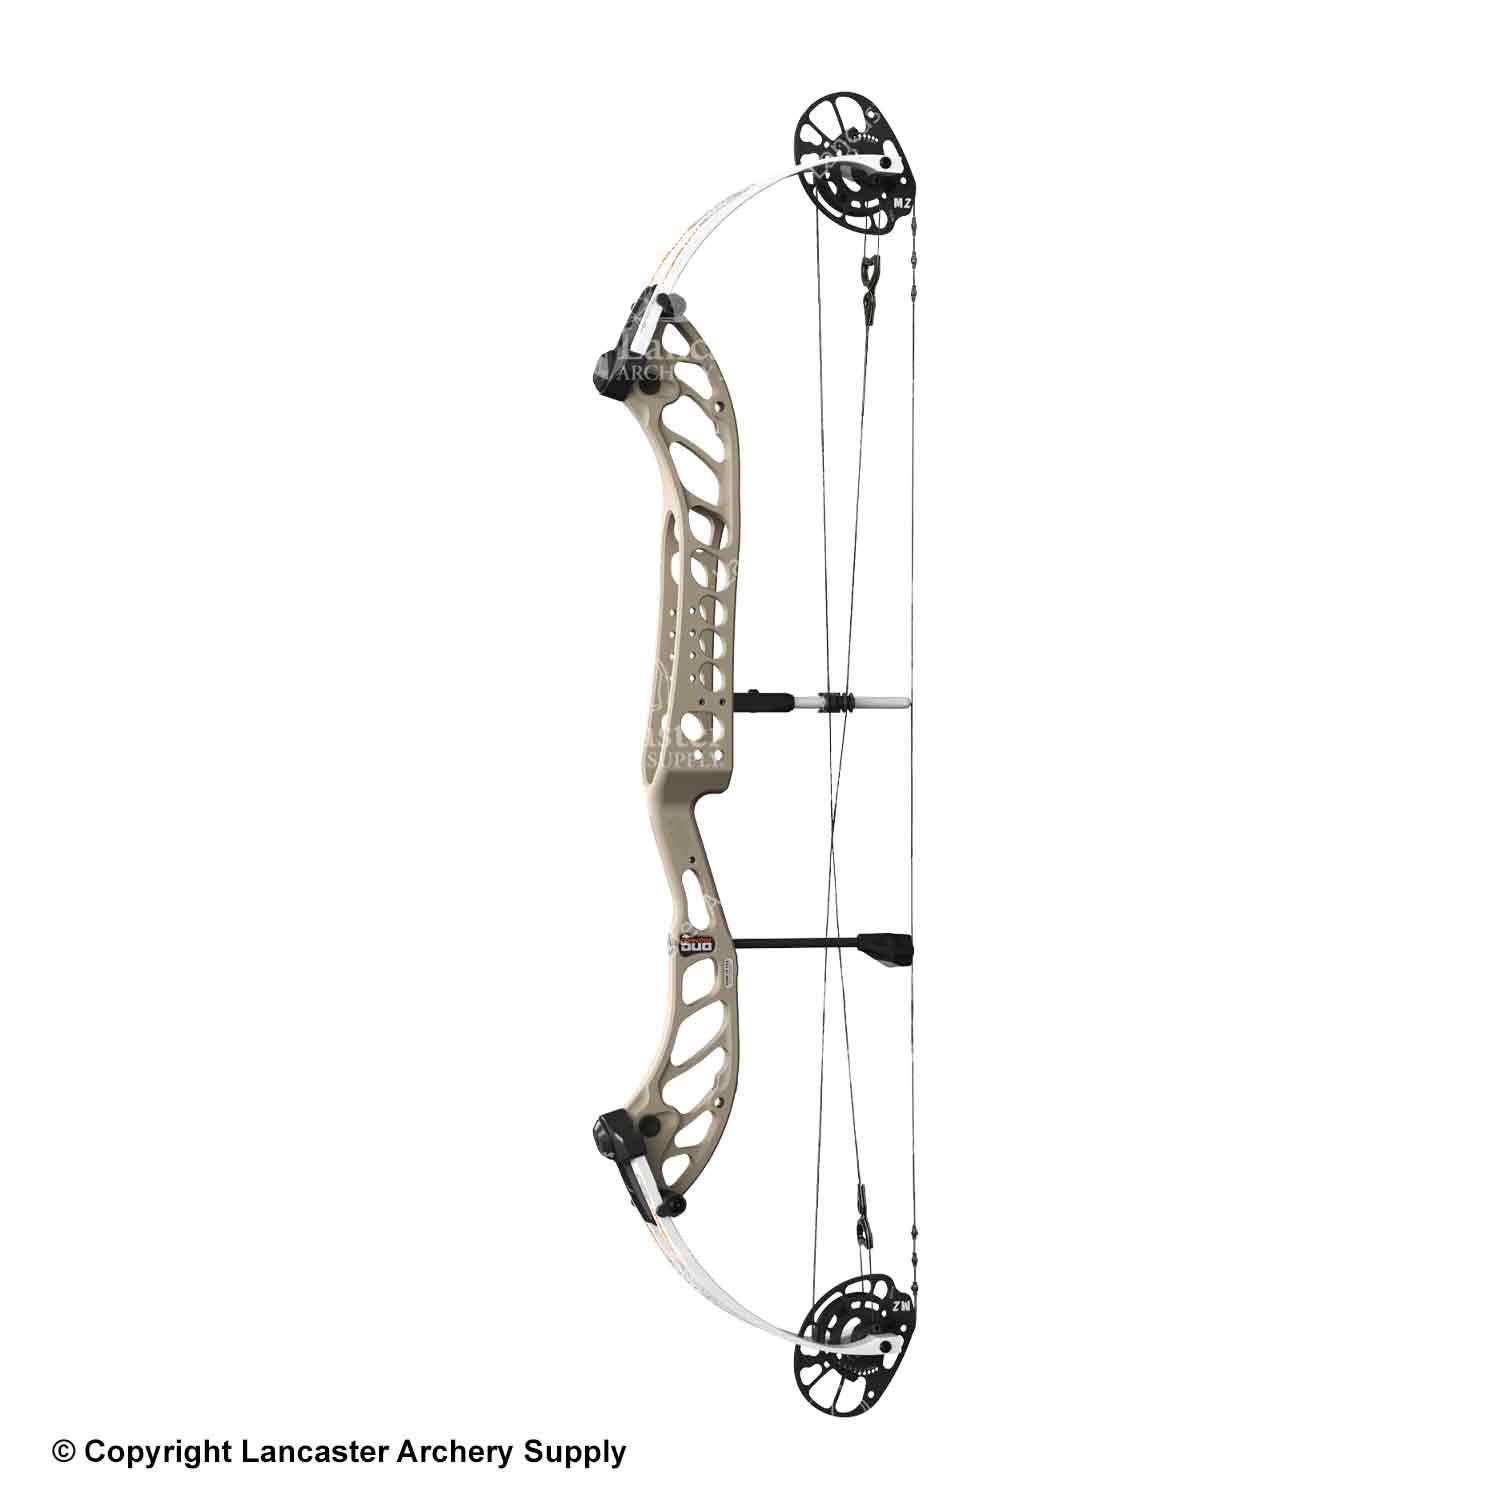 PSE Dominator Duo 35 Compound Target Bow (M2)